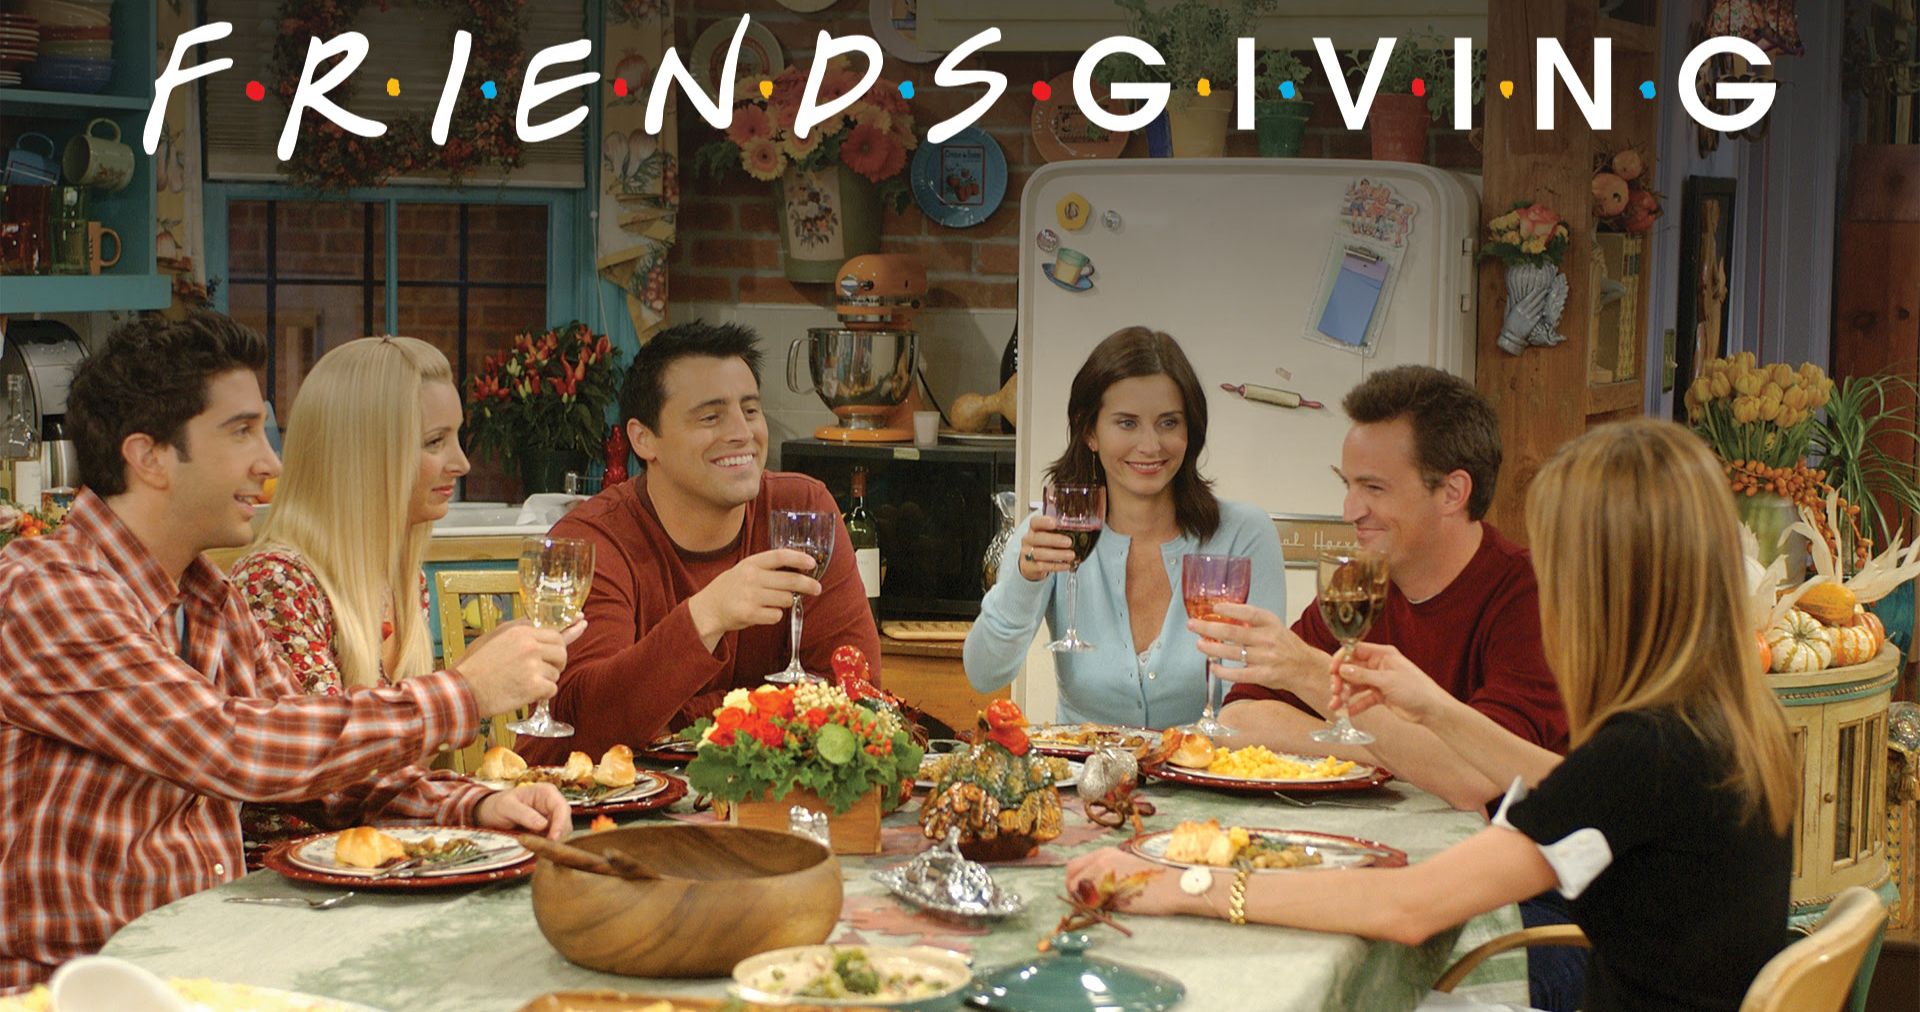 Friendsgiving Brings 8 Friends Thanksgiving Episodes to Theaters This November